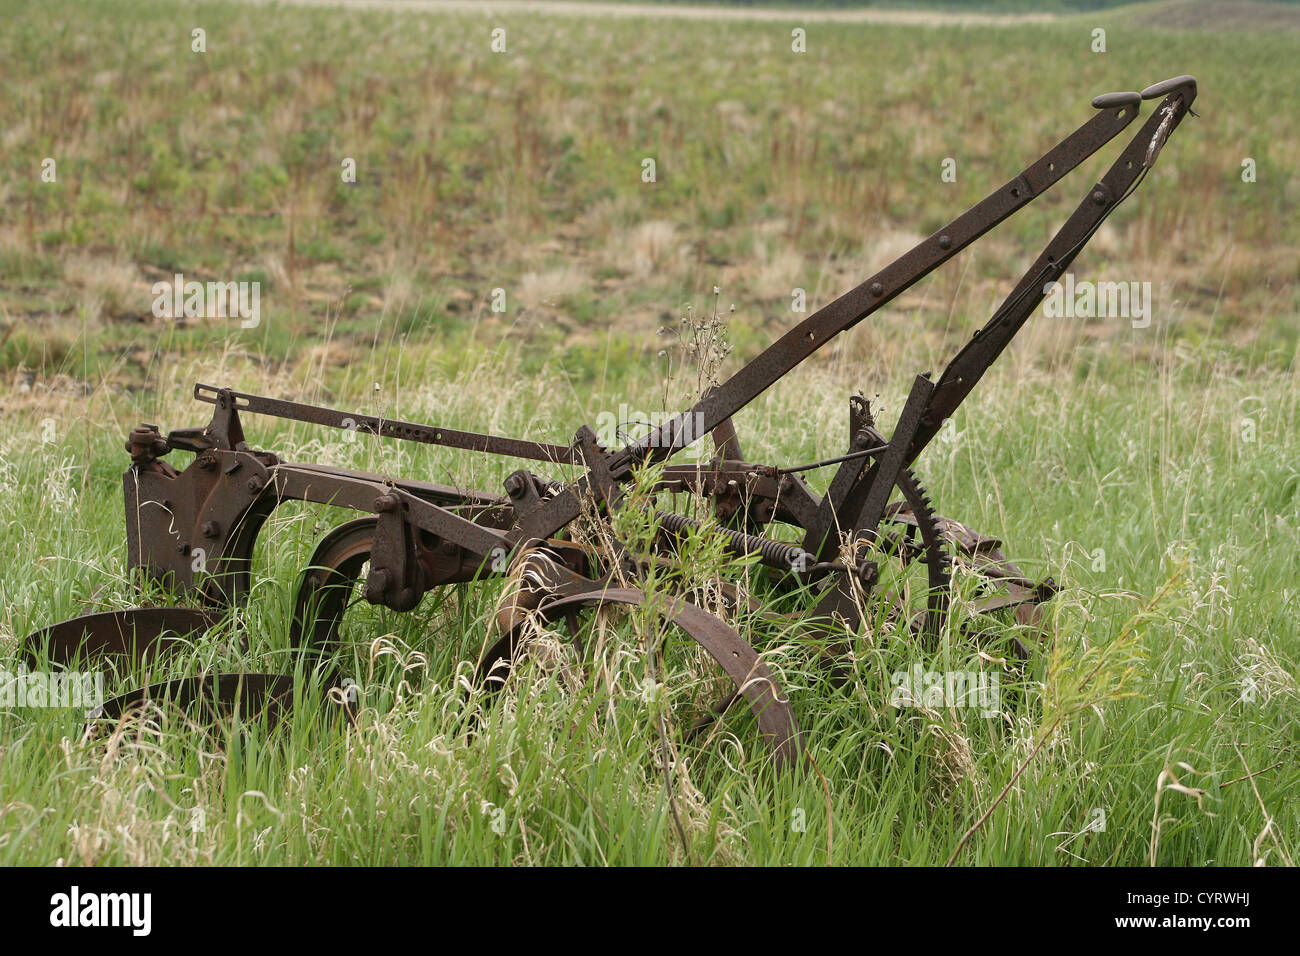 An antique, rust covered two share plow abandoned in a farmers field in spring in Winnipeg, Manitoba, Canada Stock Photo